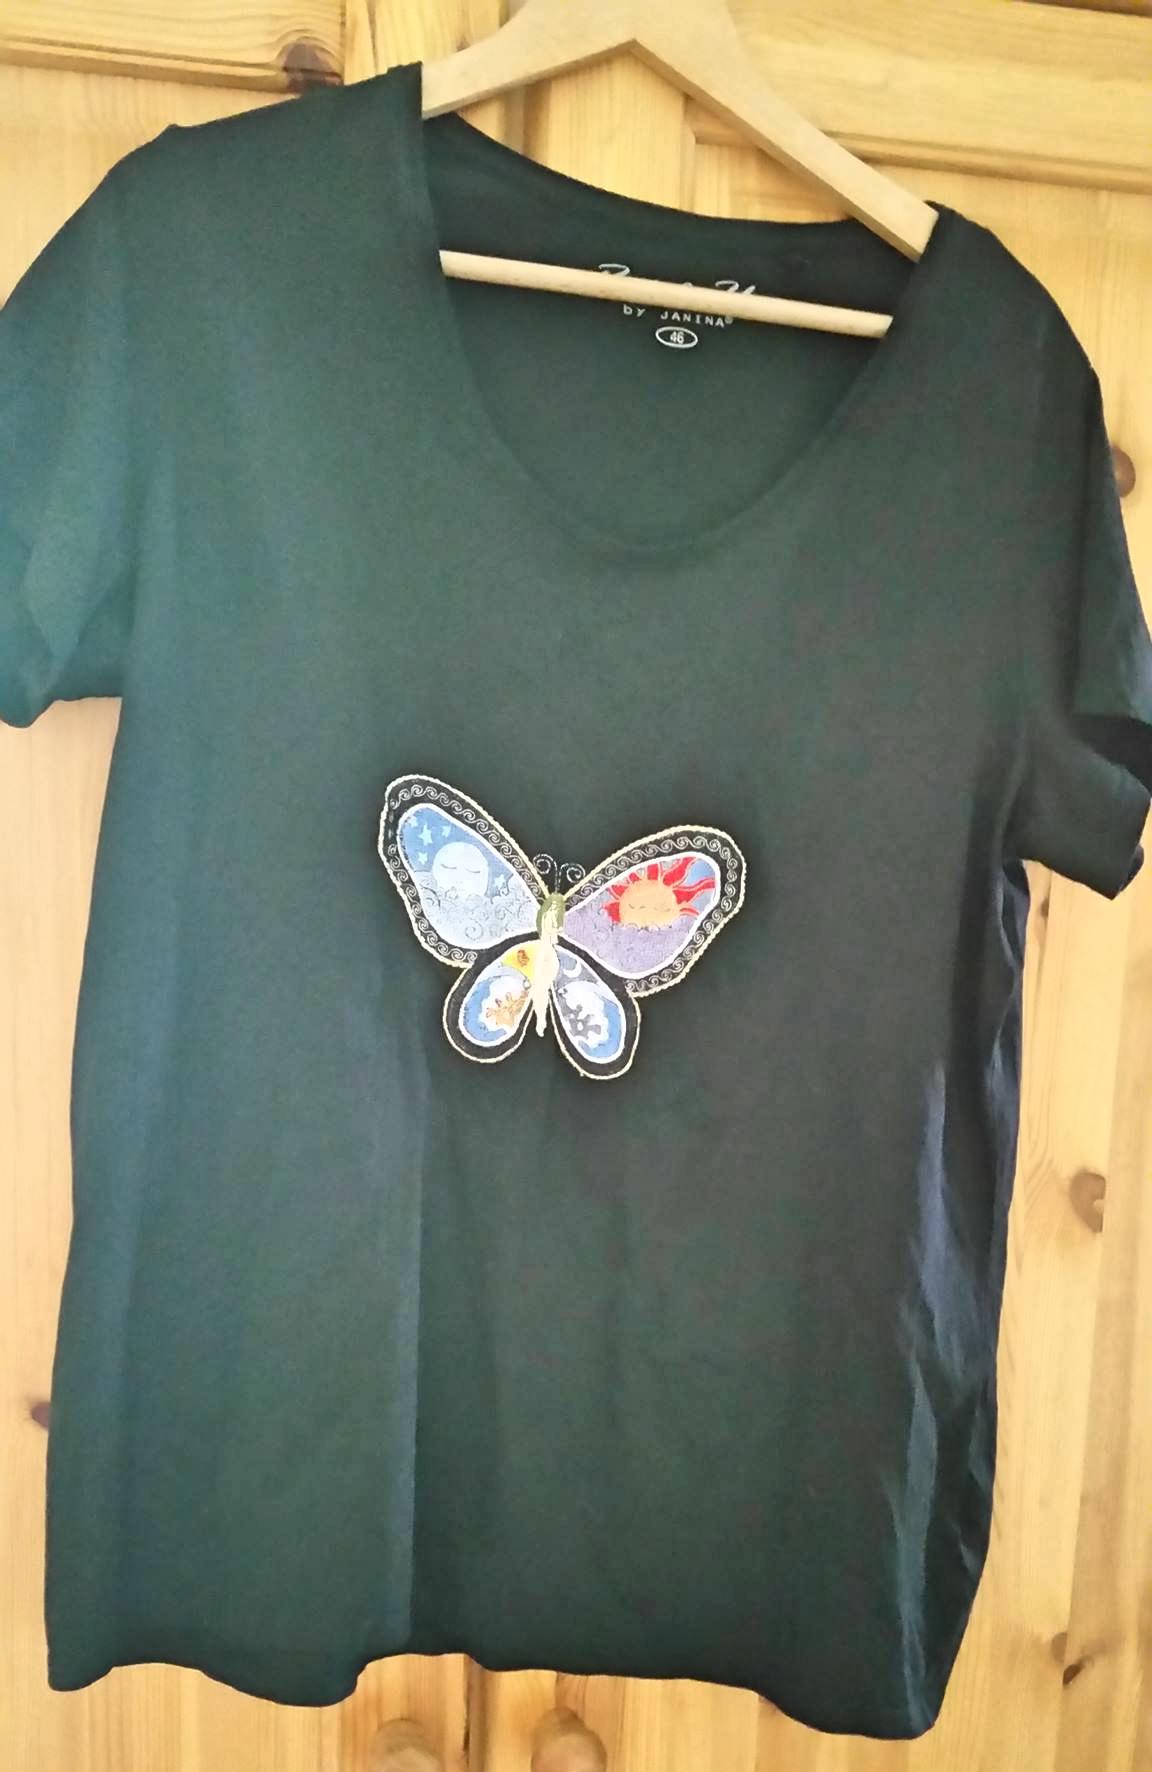 Embroidered t-shirt with fantastic butterfly free design